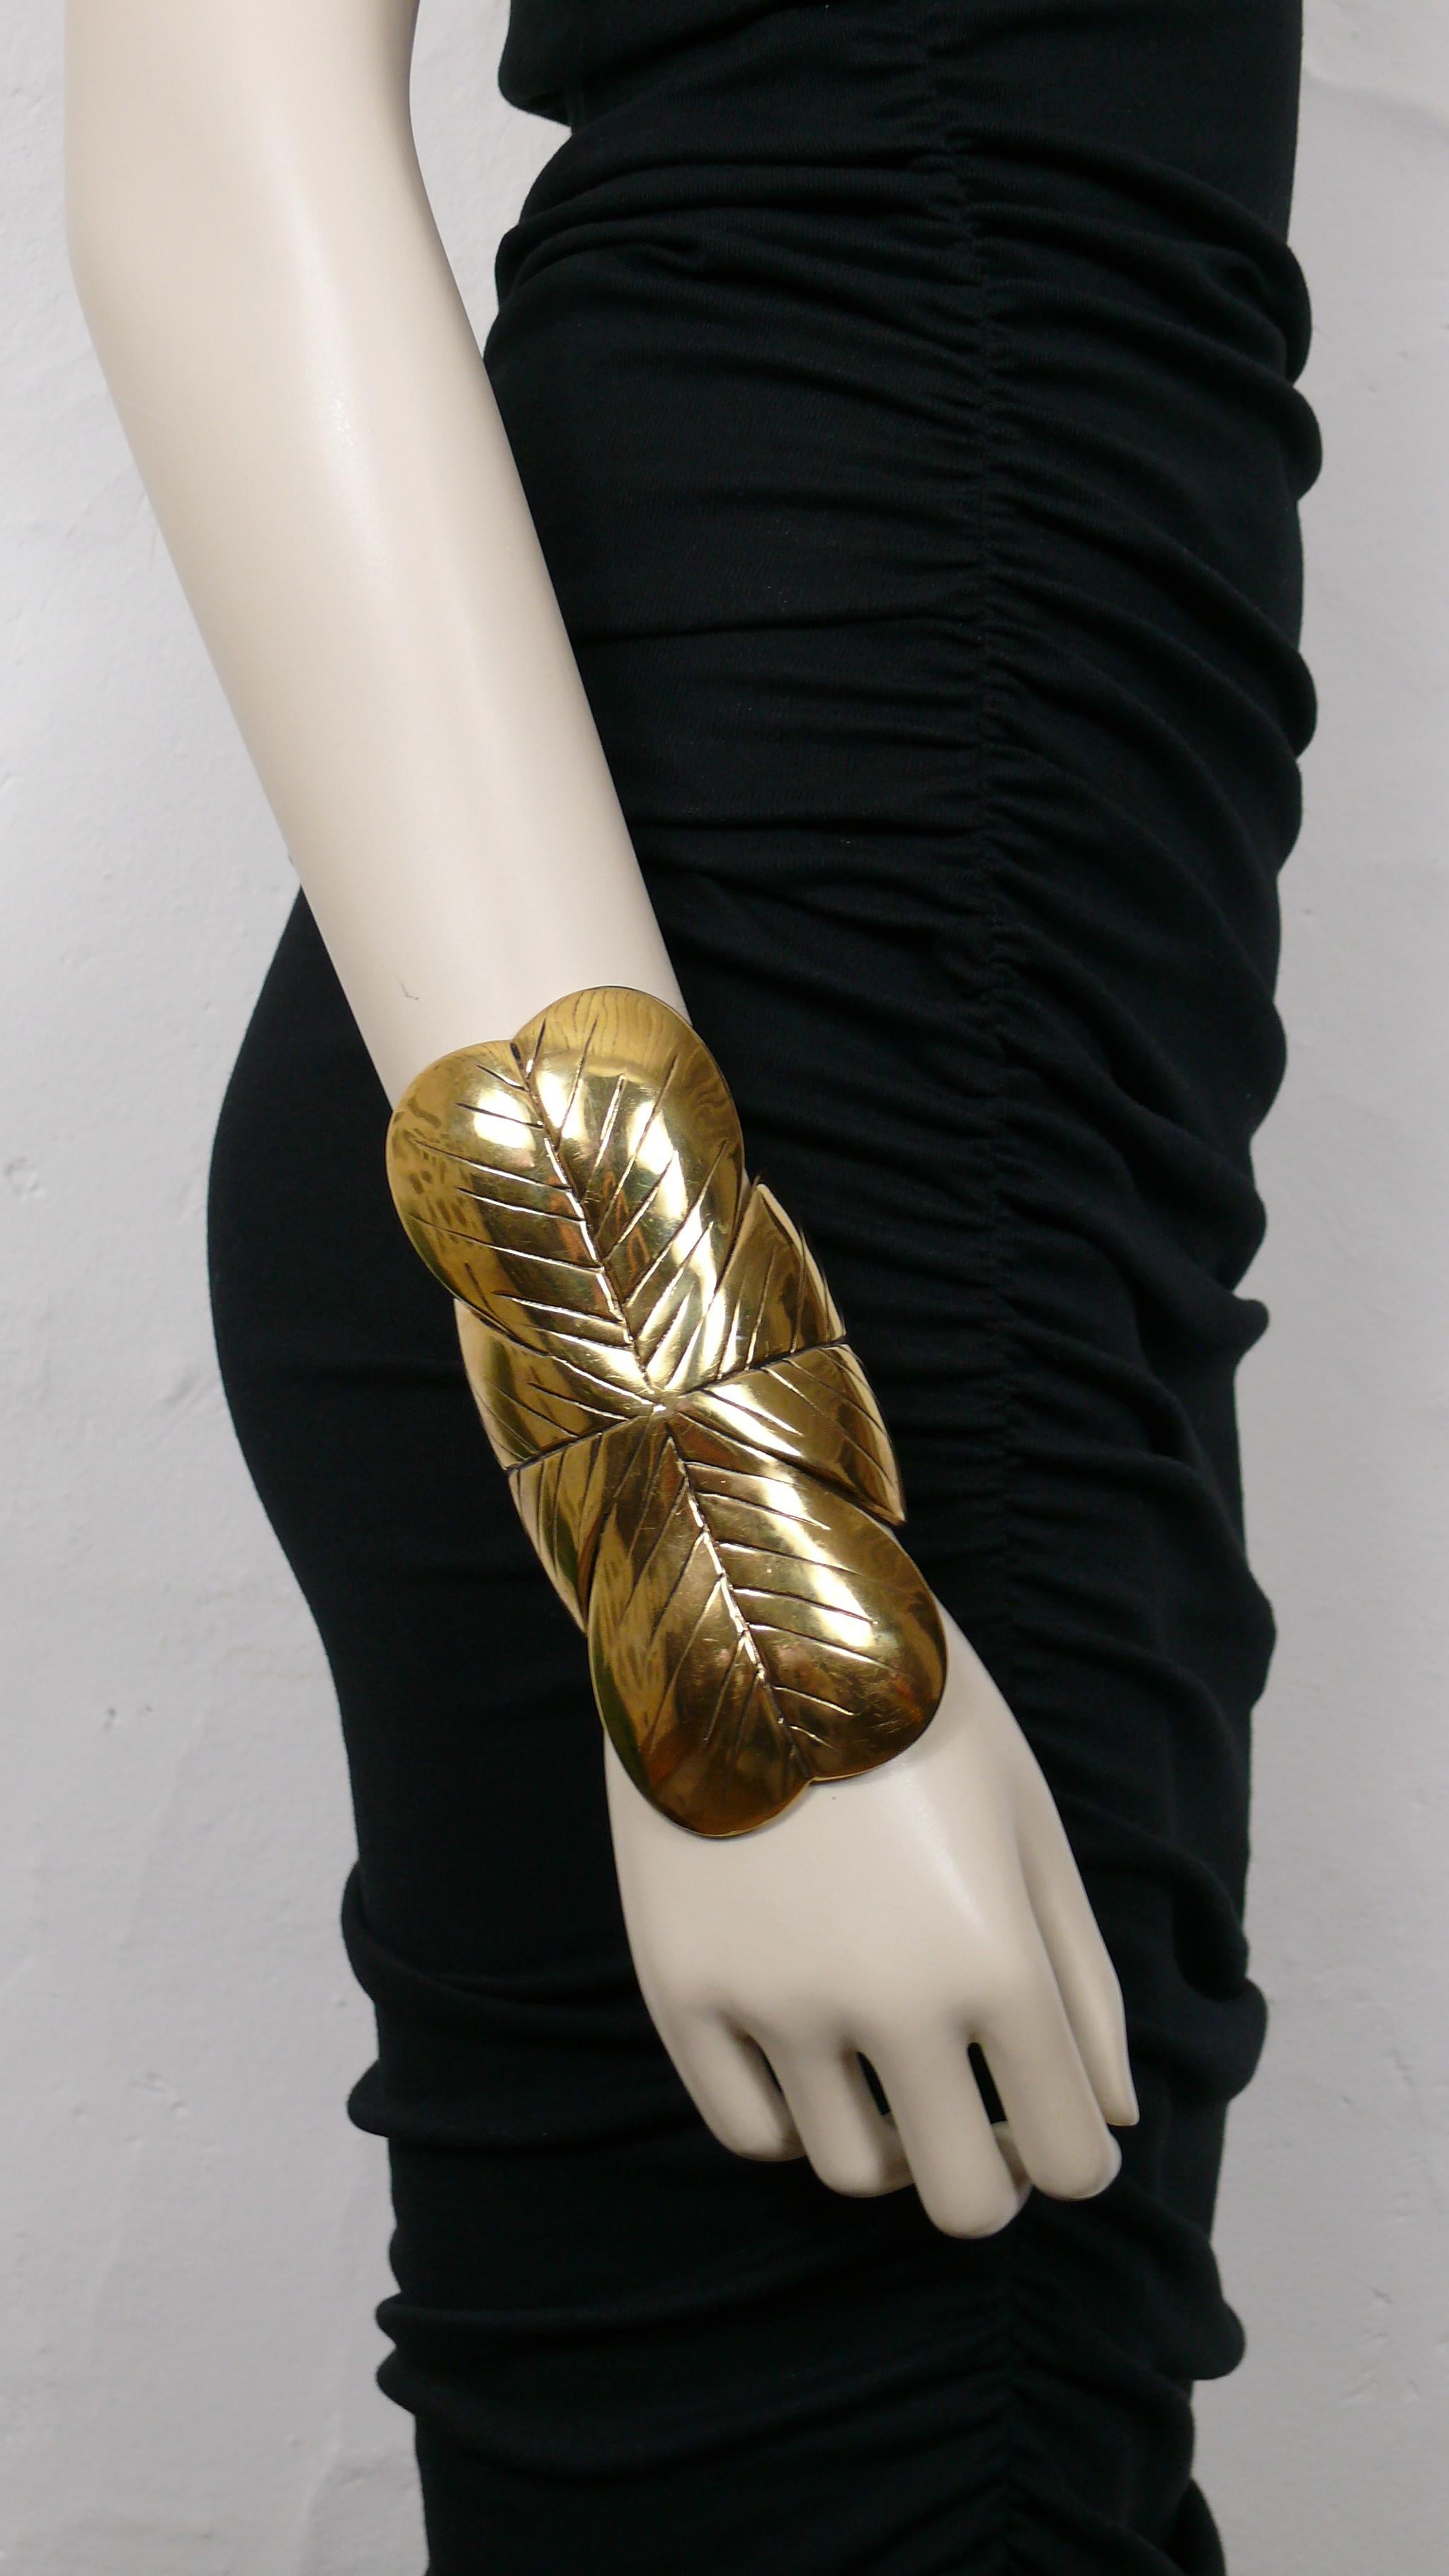 YVES SAINT LAURENT massive gold tone cuff bracelet featuring a four leaf clover.

Embossed YVES SAINT LAURENT.

Indicative measurements : inner measurements approx. 5.1 cm (2 inches) x 4 cm (1.57 inches) / max. length approx. 14 cm (5.51 inches) /